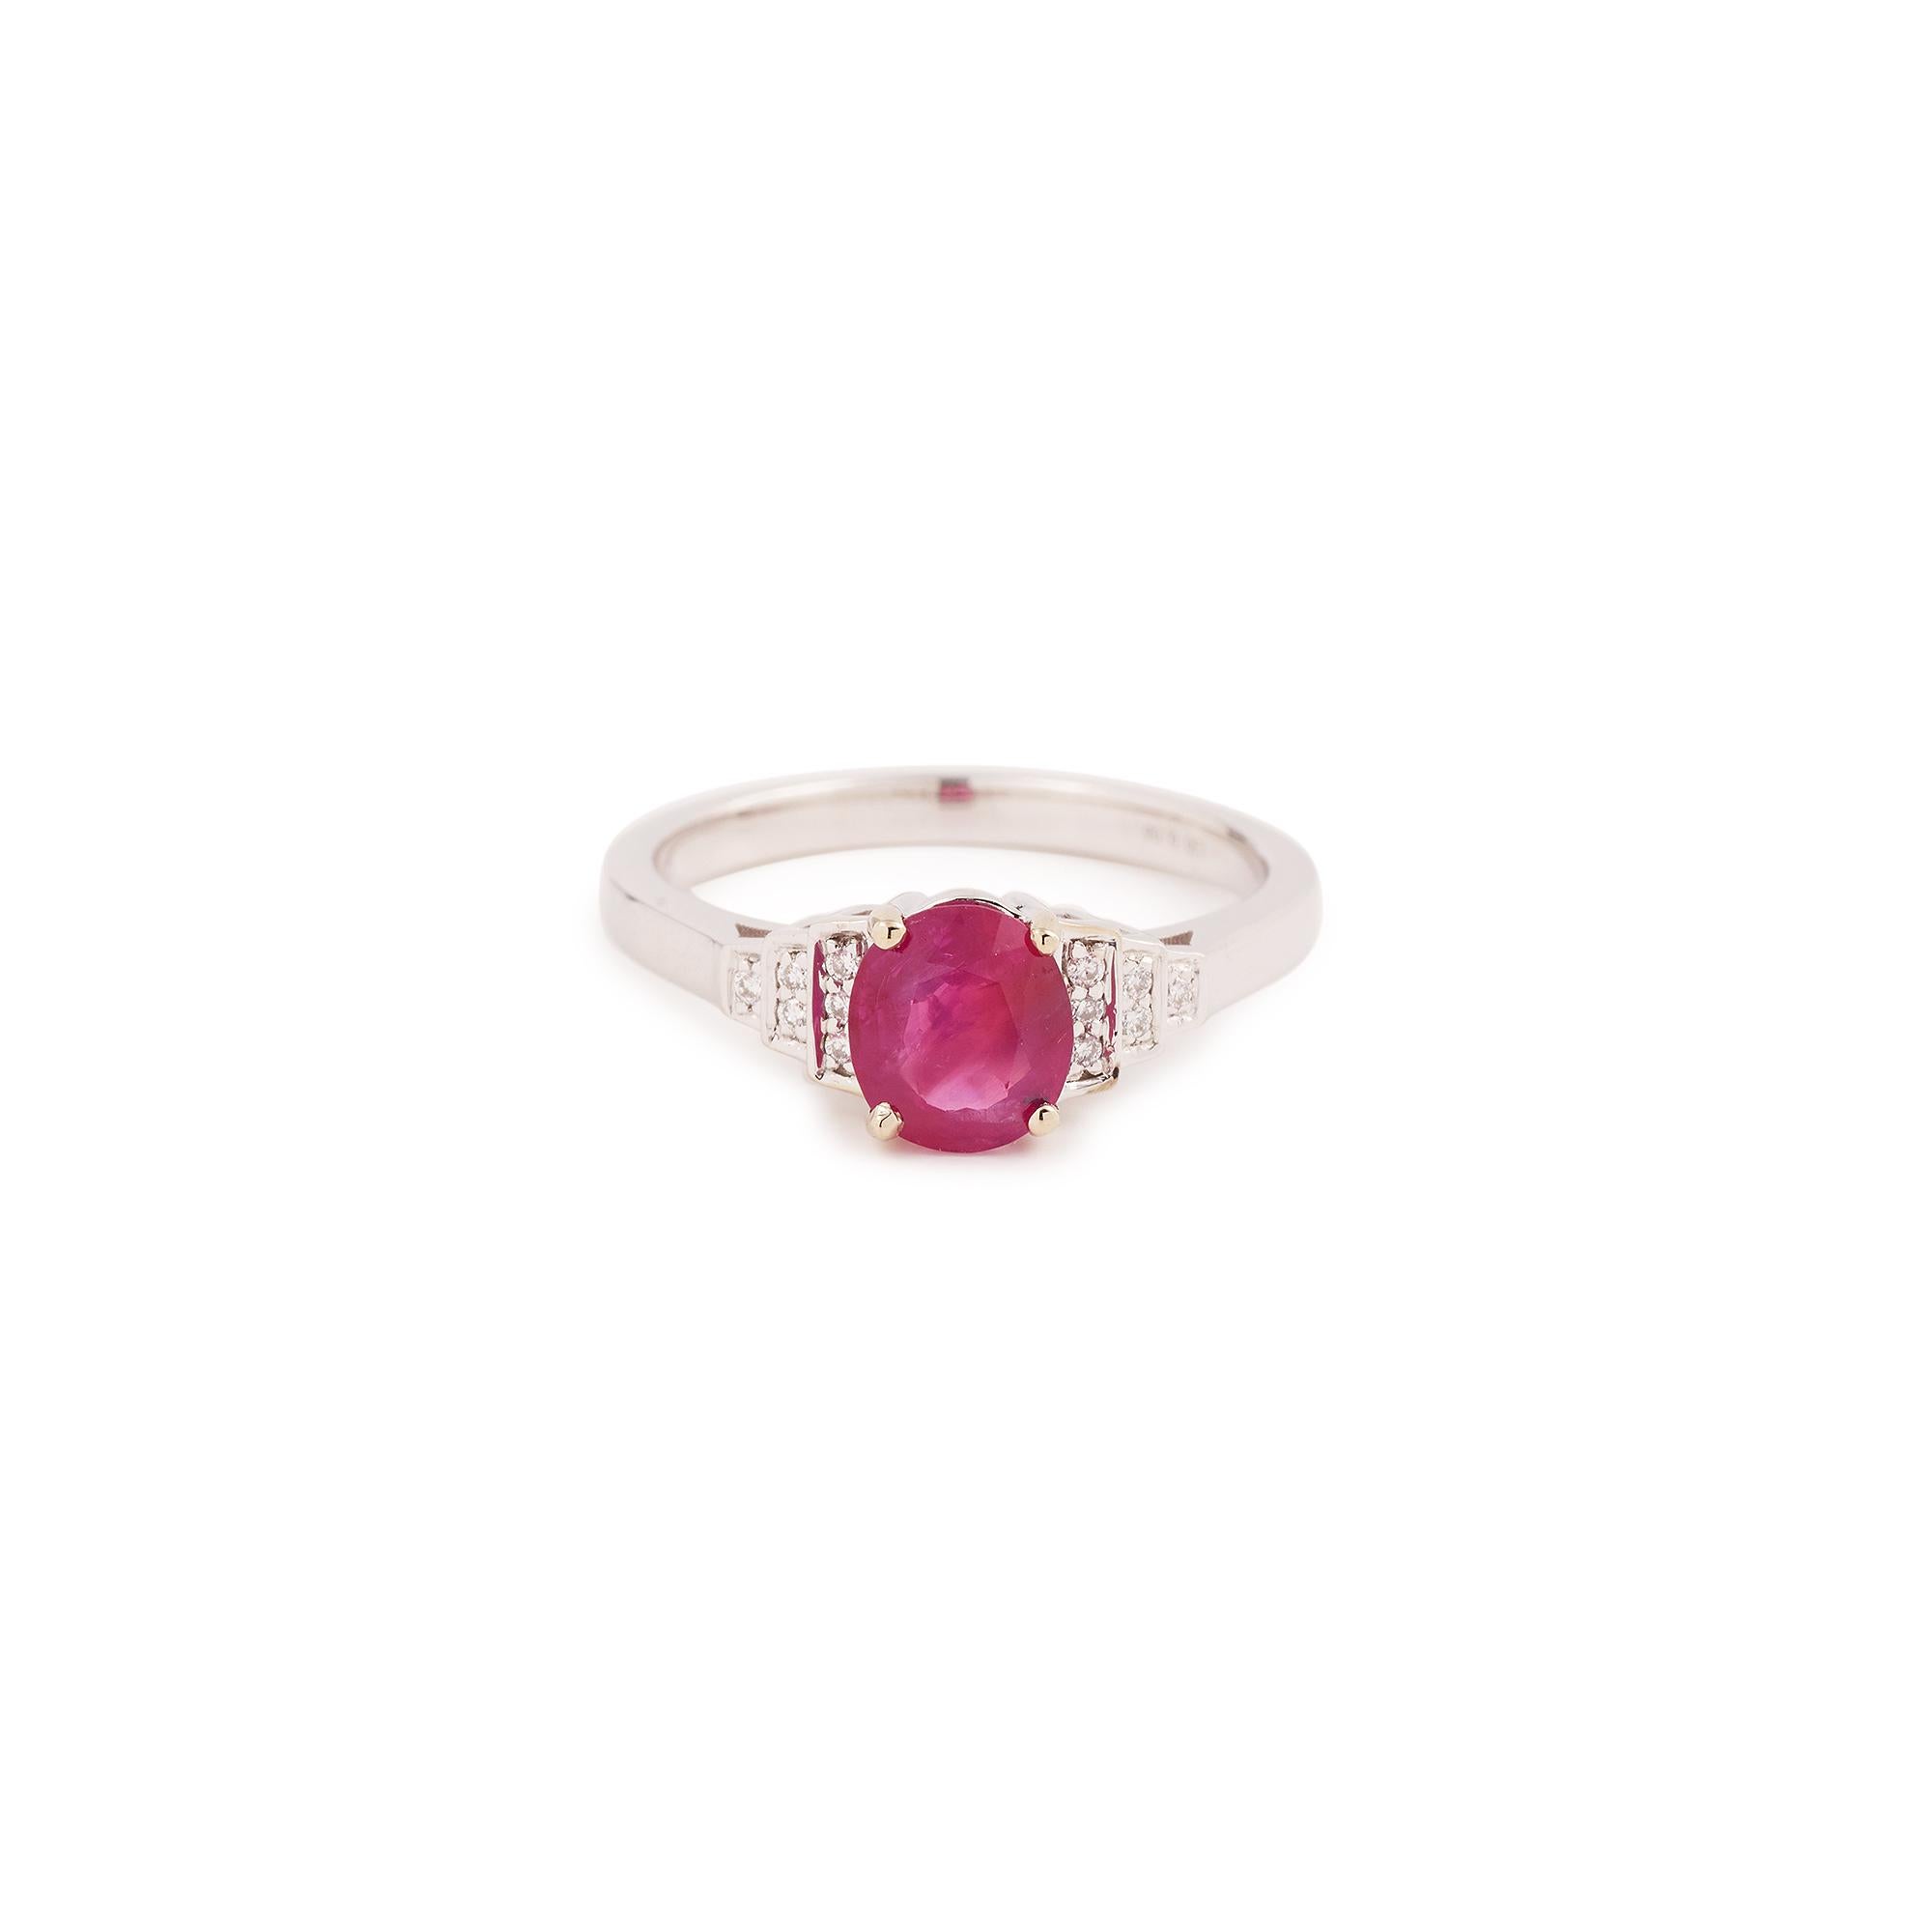 Oval faceted Burmese ruby, certified by GEM Paris.

Unheated and untreated (certified)

Ruby's weight: 1 carat

Dimensions: 0.66 x 0.64 x 0.58 cm (0.24 x 0.23 x 0.20 inches)

Set on a white gold ring and embellished with diamonds.

Finger size: 51